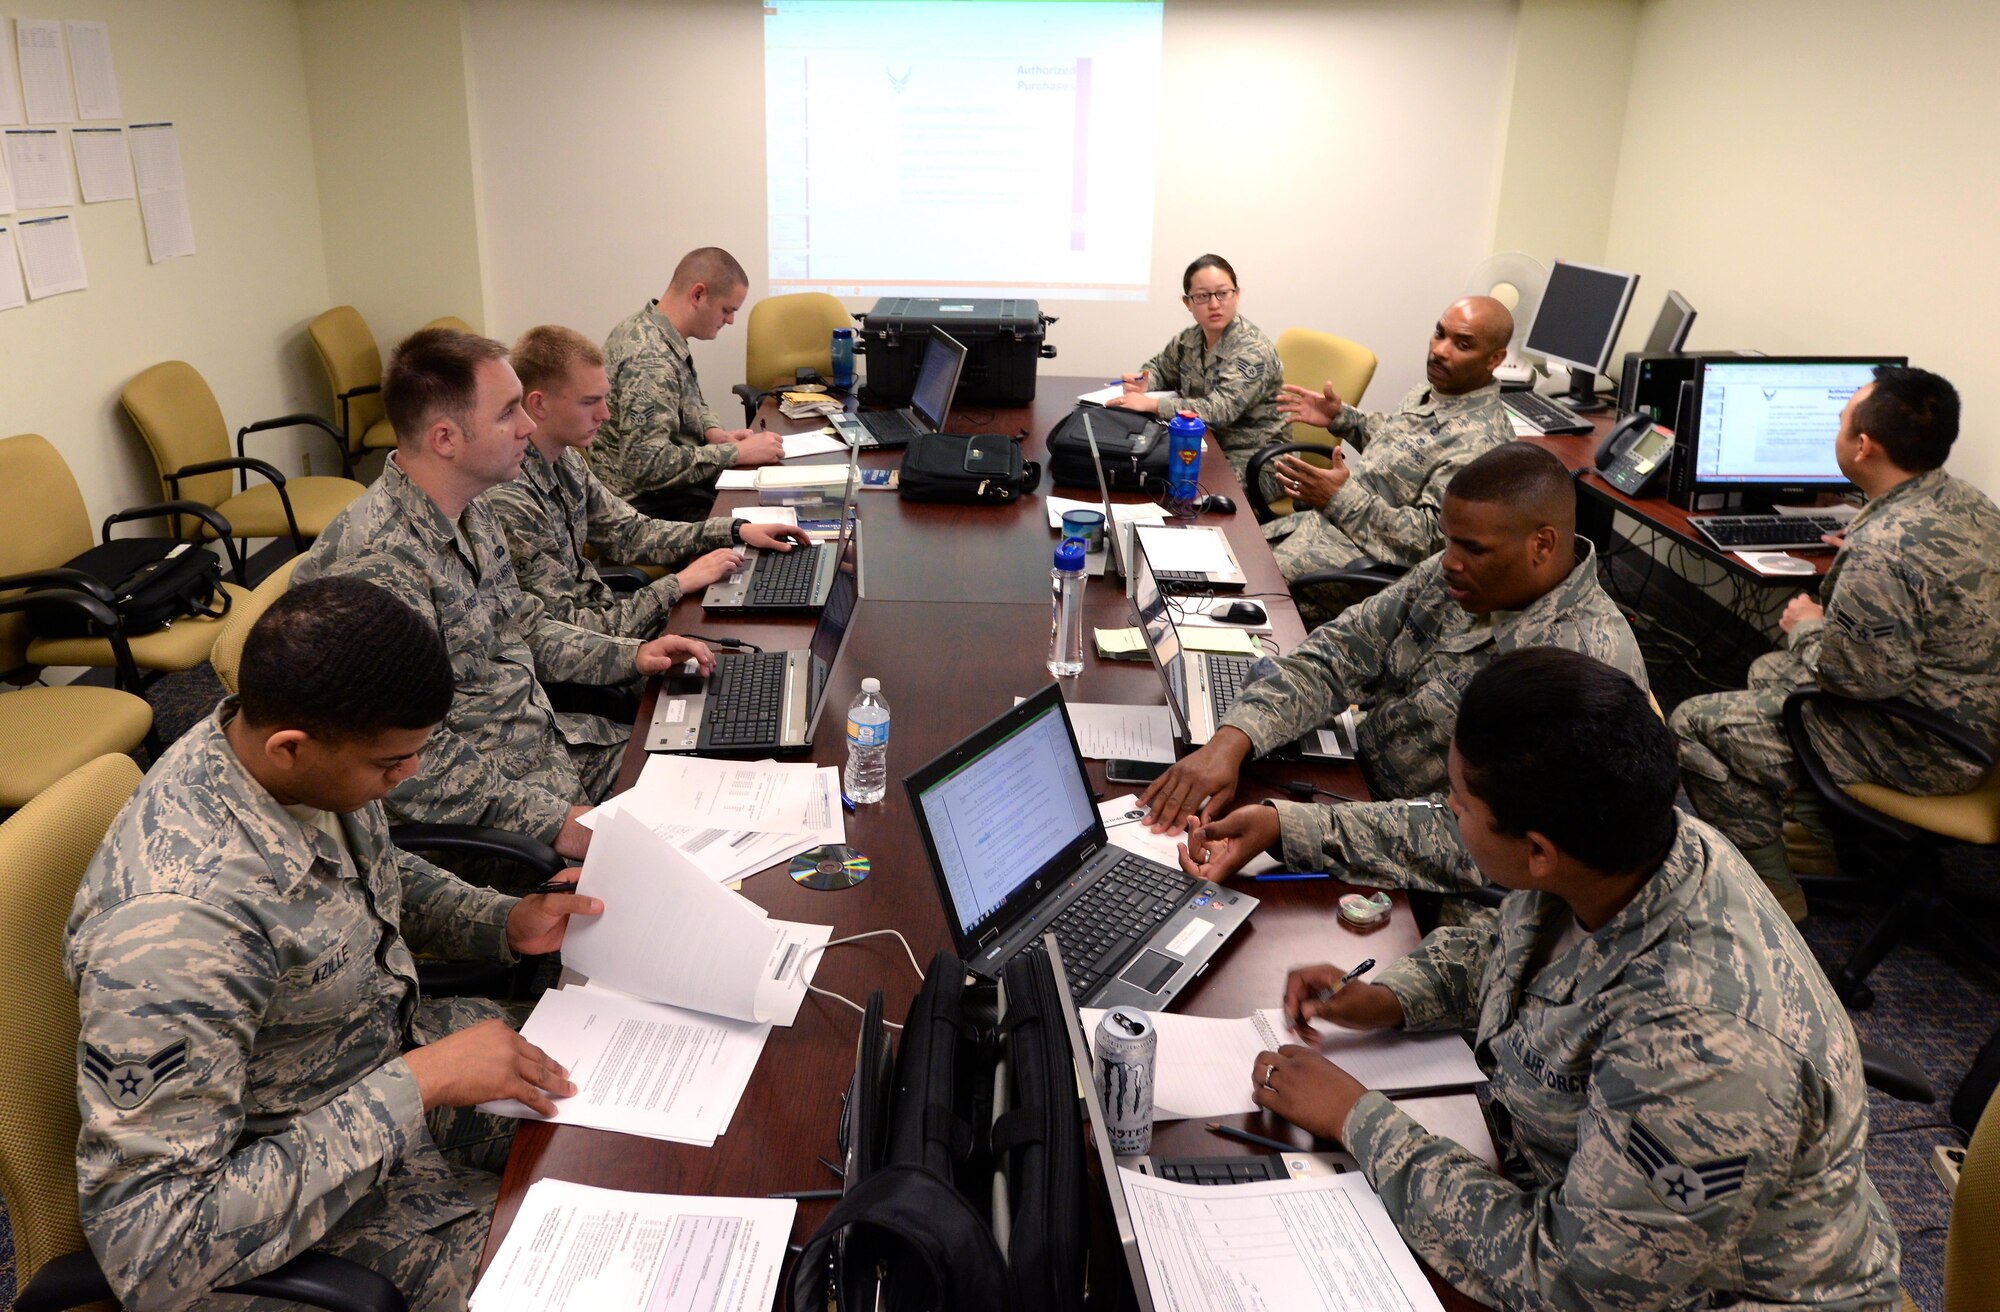 A team of contract specialists and contract officers from the 55th Contracting Squadron discuss learning objectives that were used in various scenarios during a contingency contracting exercise held at Offutt Air Force Base, Neb. May 8 – 12. The exercise was designed to improve contracting readiness for bare base operations. (U.S. Air Force photo by Delanie Stafford)